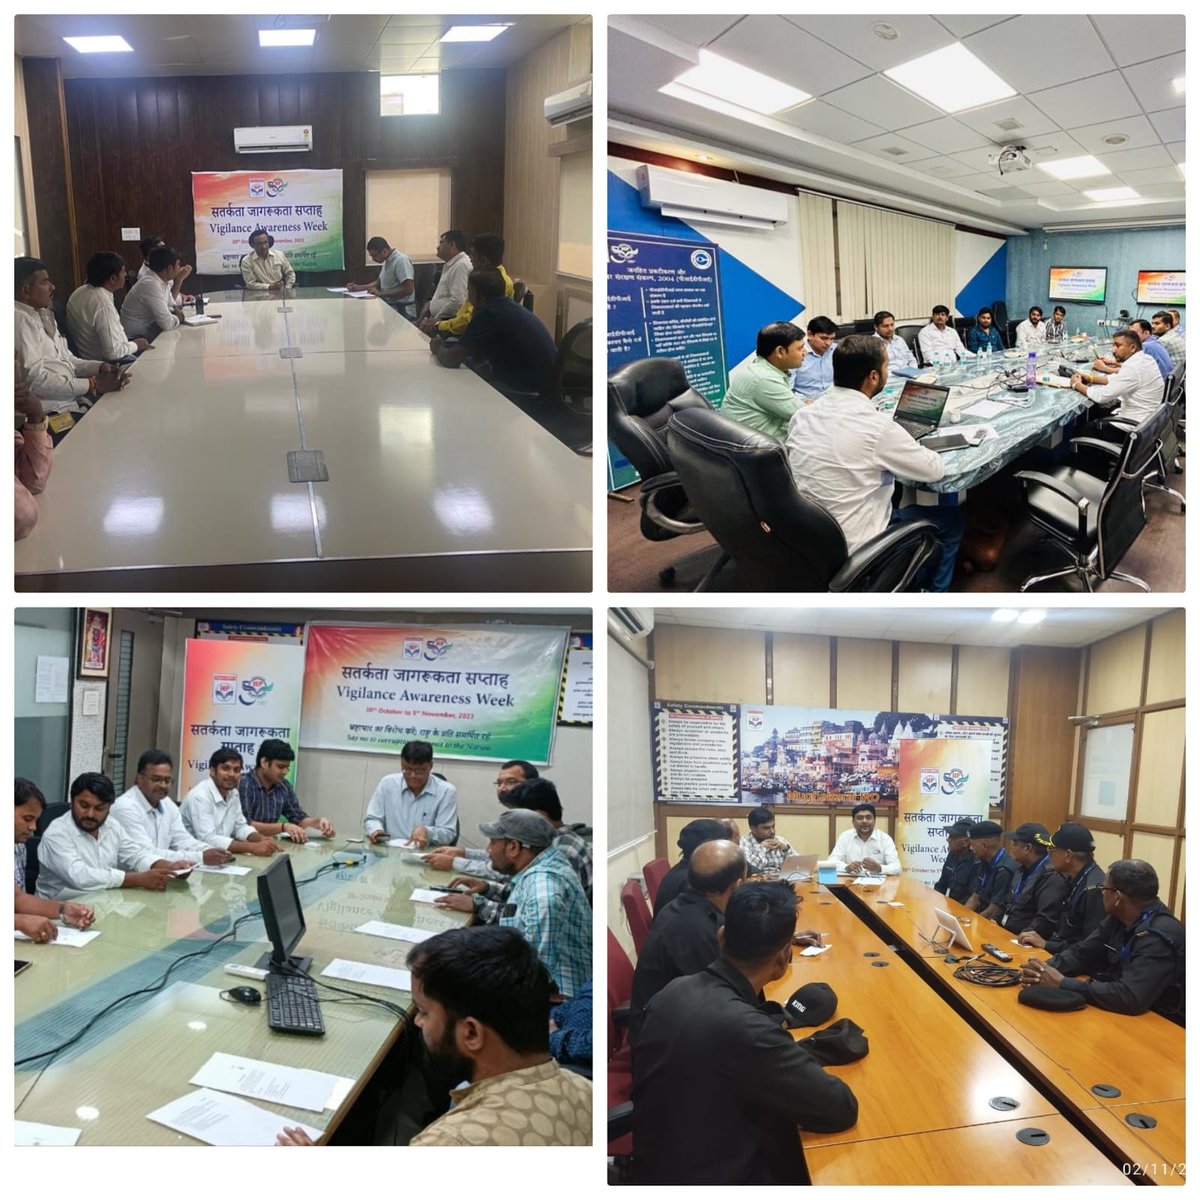 #HPCL Spreading the light of transparency during #VigilanceAwarenessWeek @ncz_hpcl @HPGAS11. 
Our meetings with Dealers, Vendors and Transporters are aimed at fostering trust and integrity. Together, we unite for building a more accountable and honest business world.